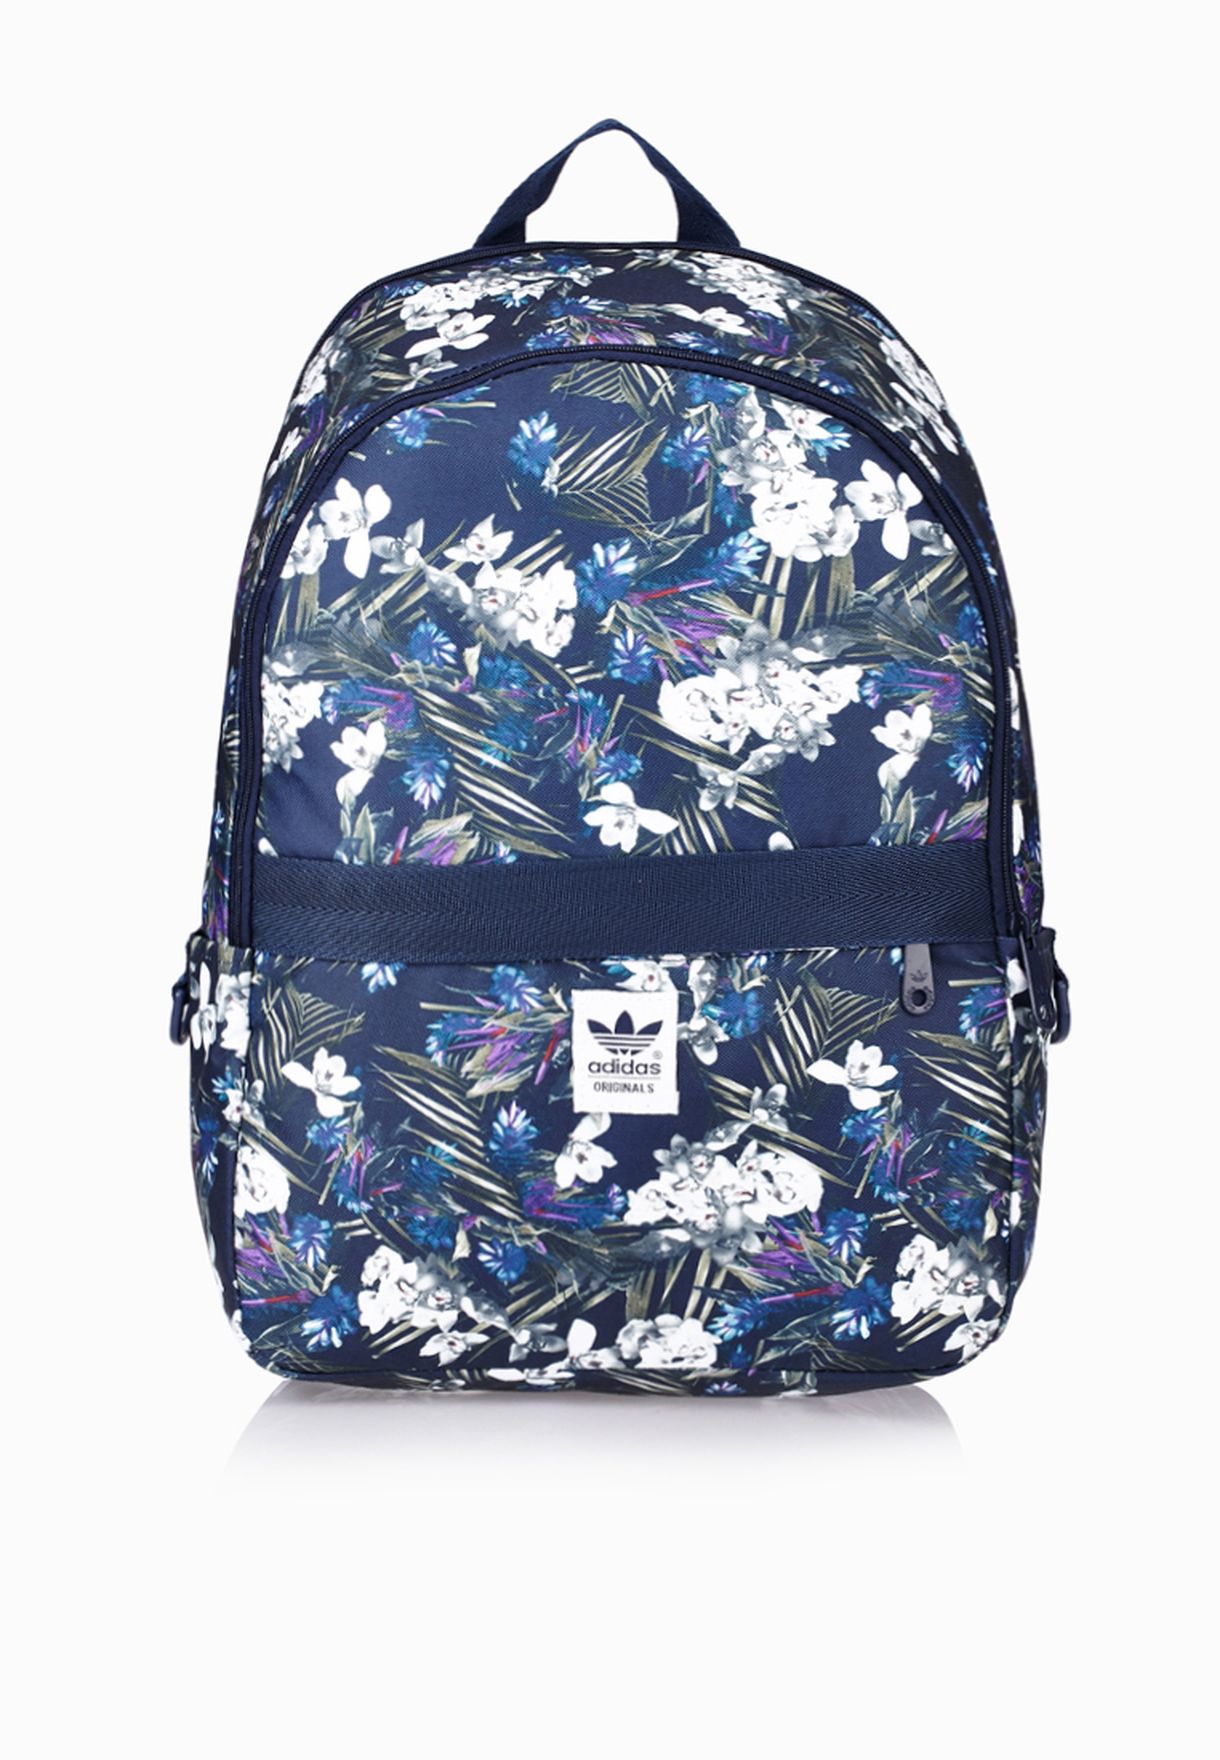 floral adidas backpack